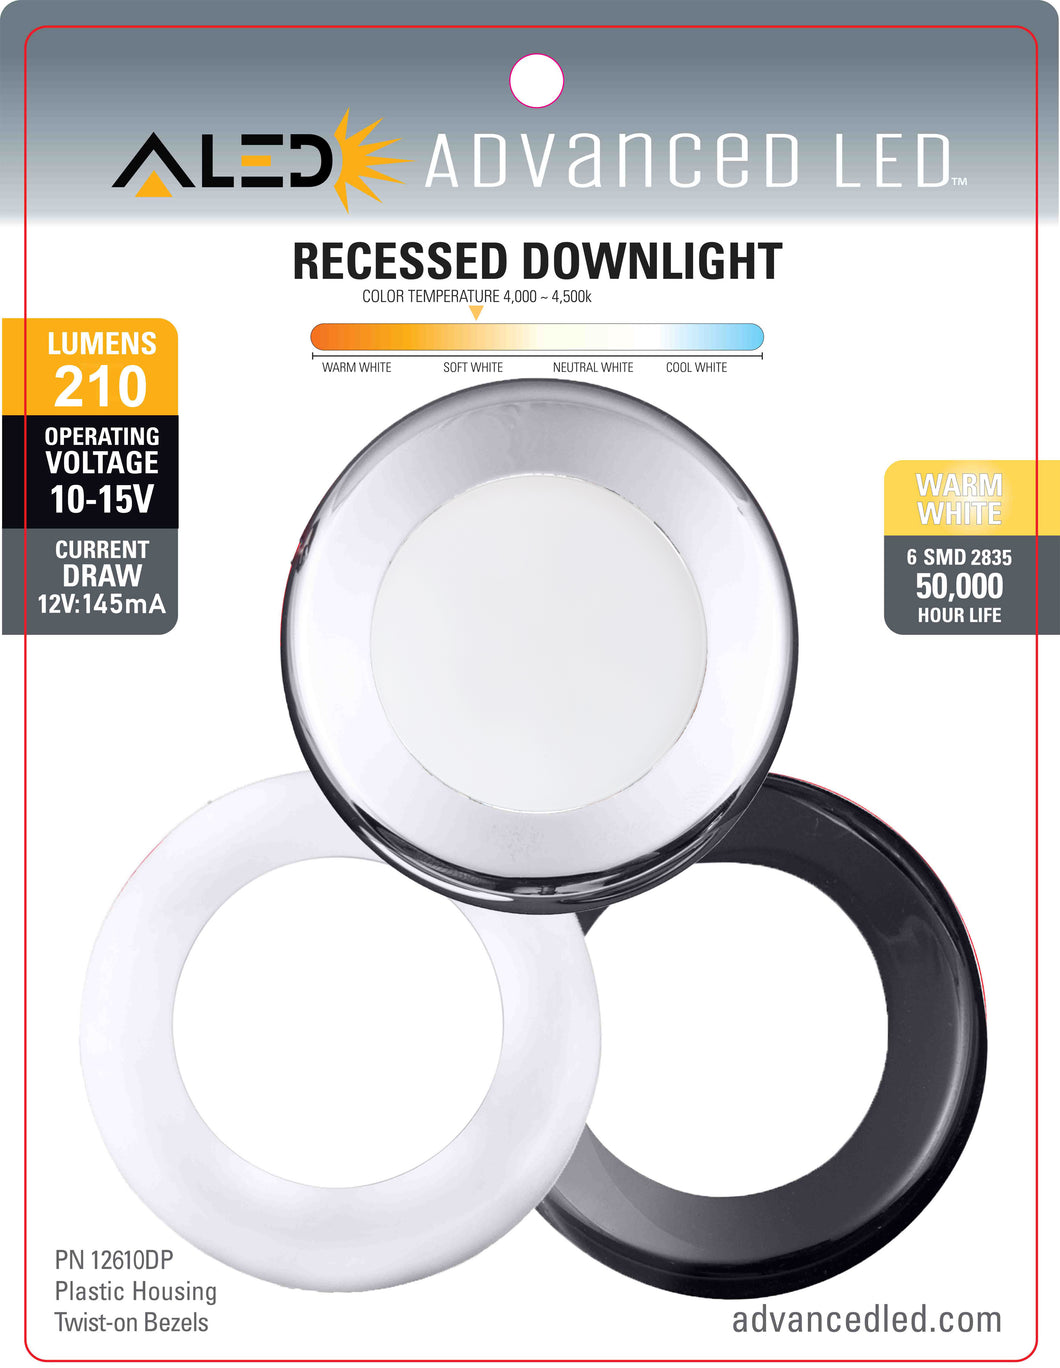 NEW & IMPROVED! ADVANCED LED Recessed Puck Downlight w/ 3 Bezel-in-1 (White, Chrome, & Black)